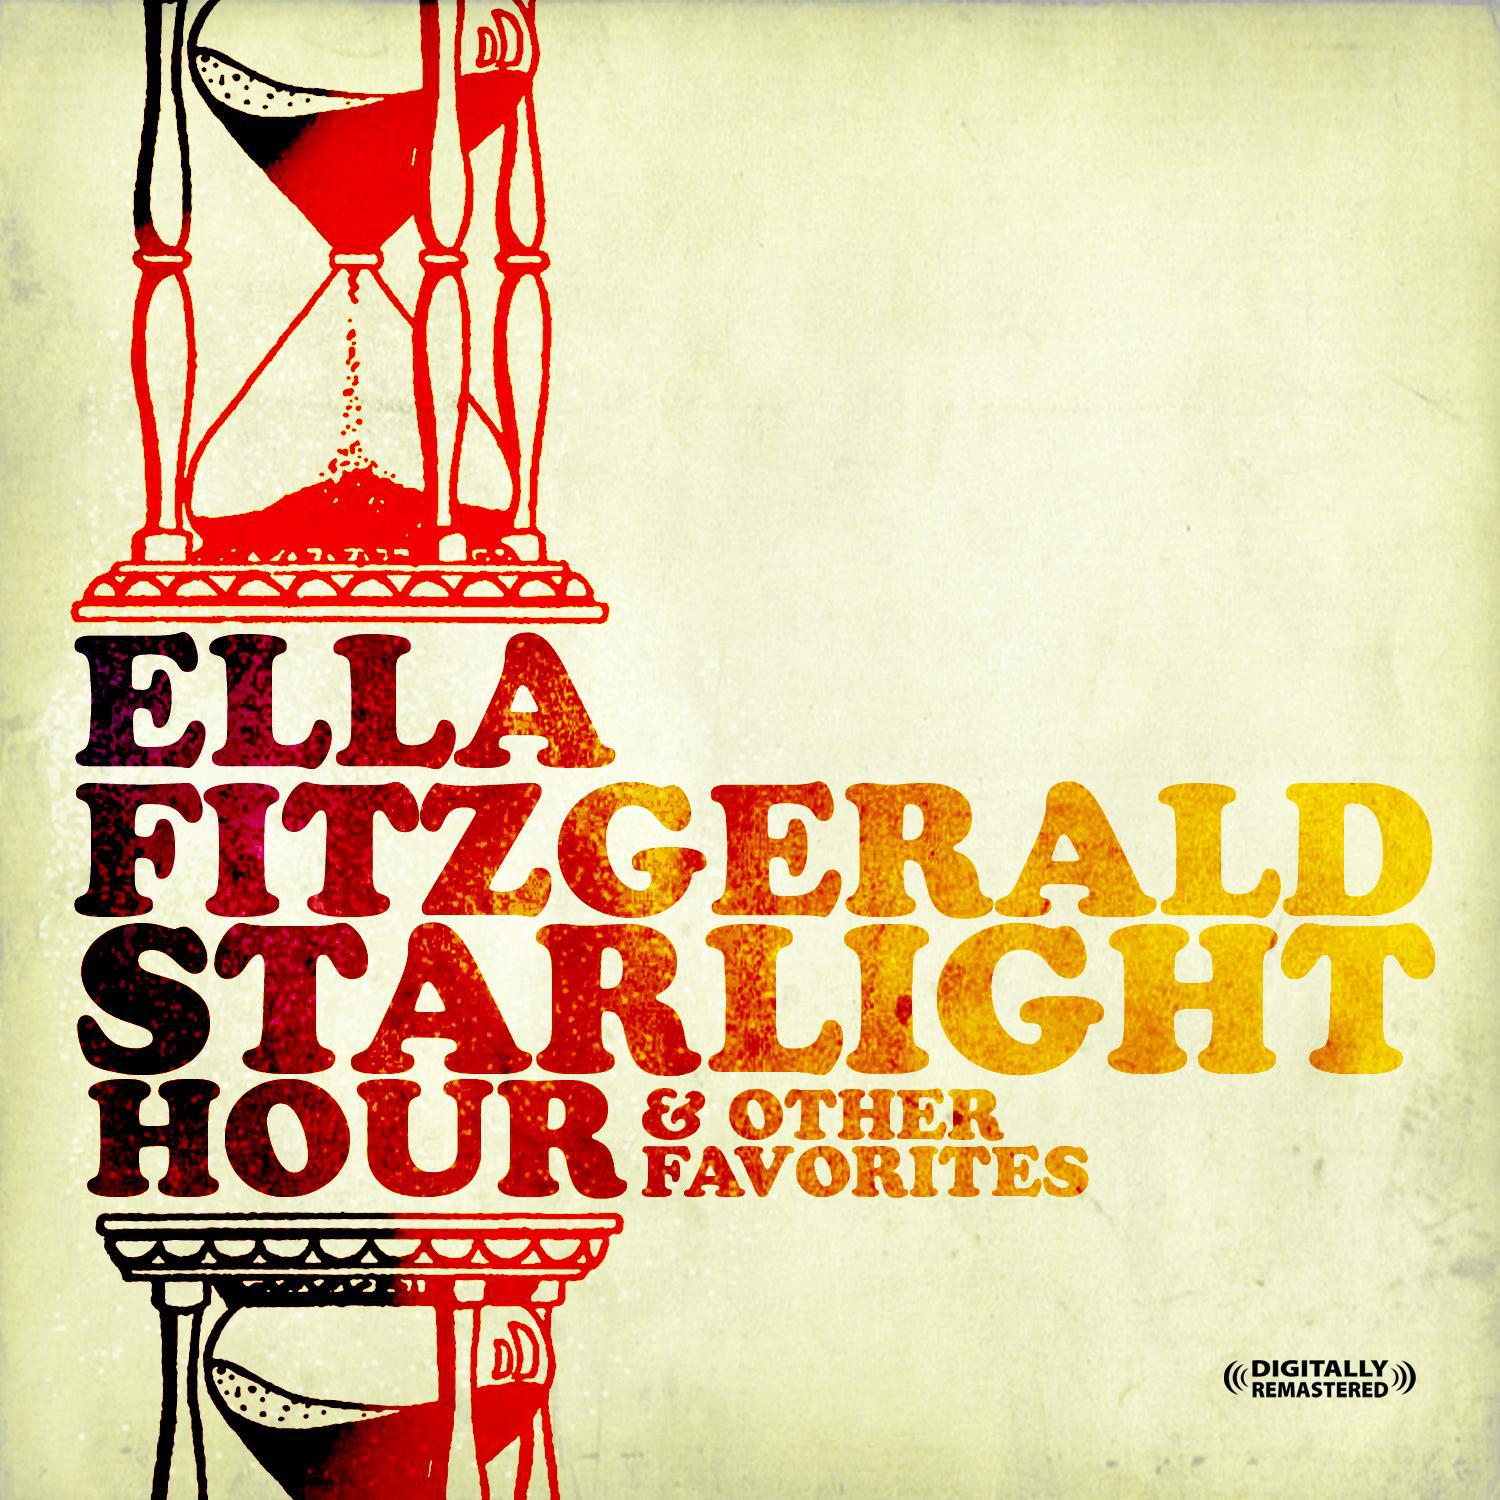 Starlight Hour & Other Favorites (Digitally Remastered)